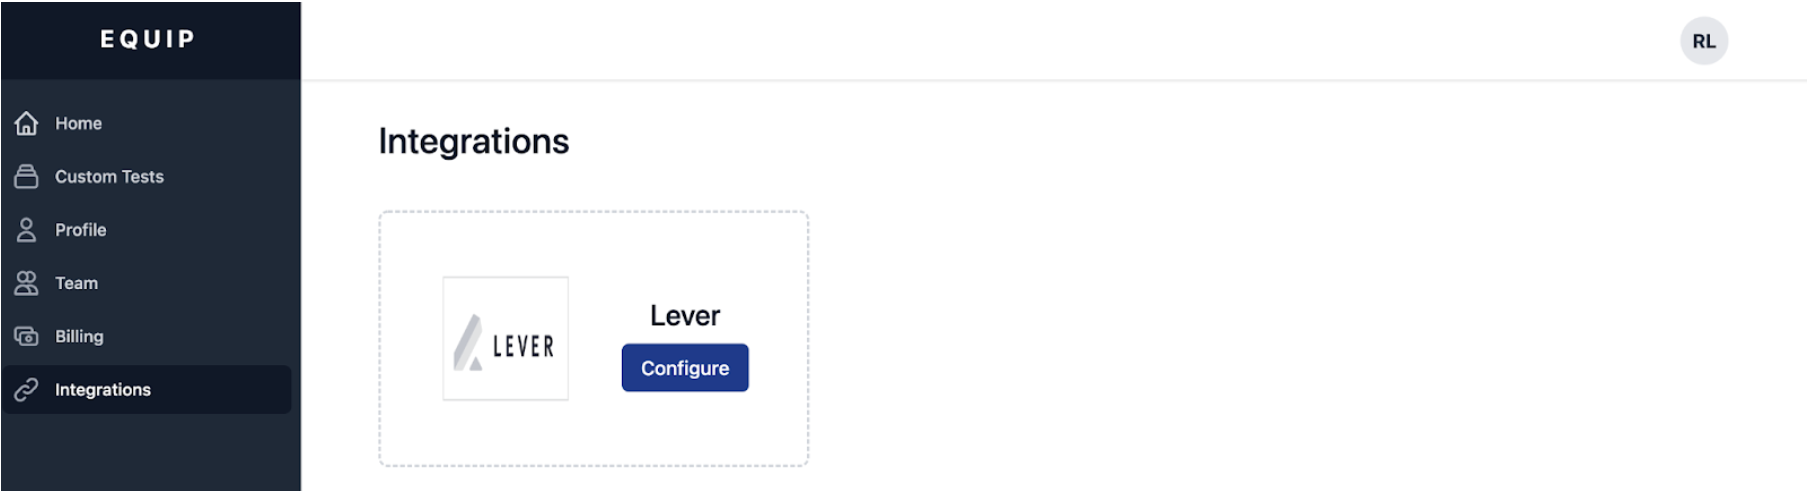 Equip platform integrations page with Lever card